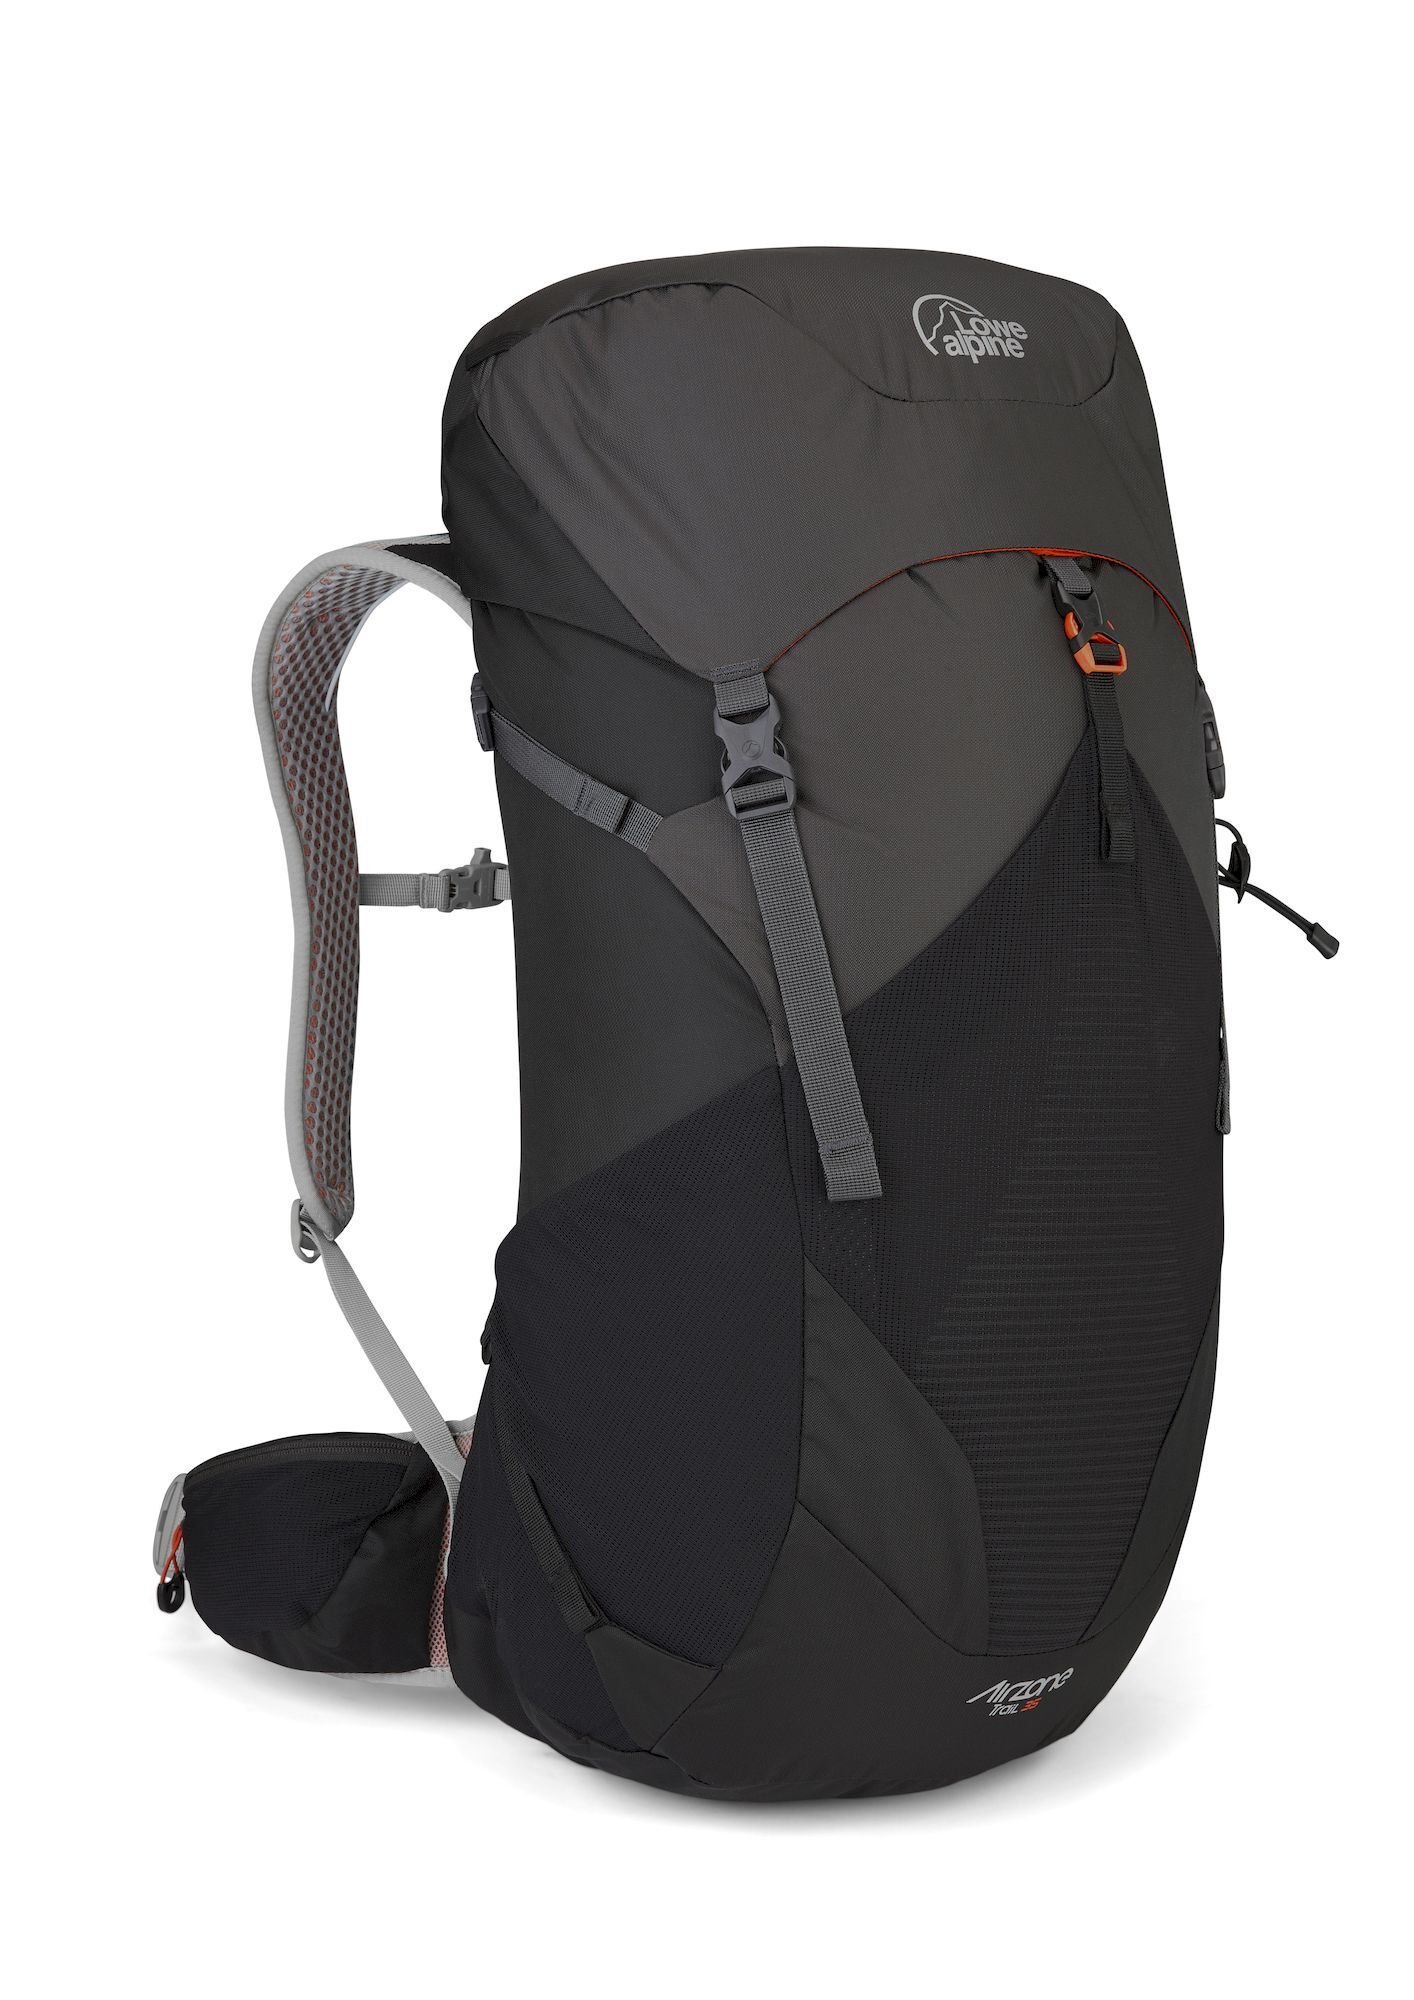 Lowe Alpine - AirZone Trail 35 - Hiking backpack - Men's